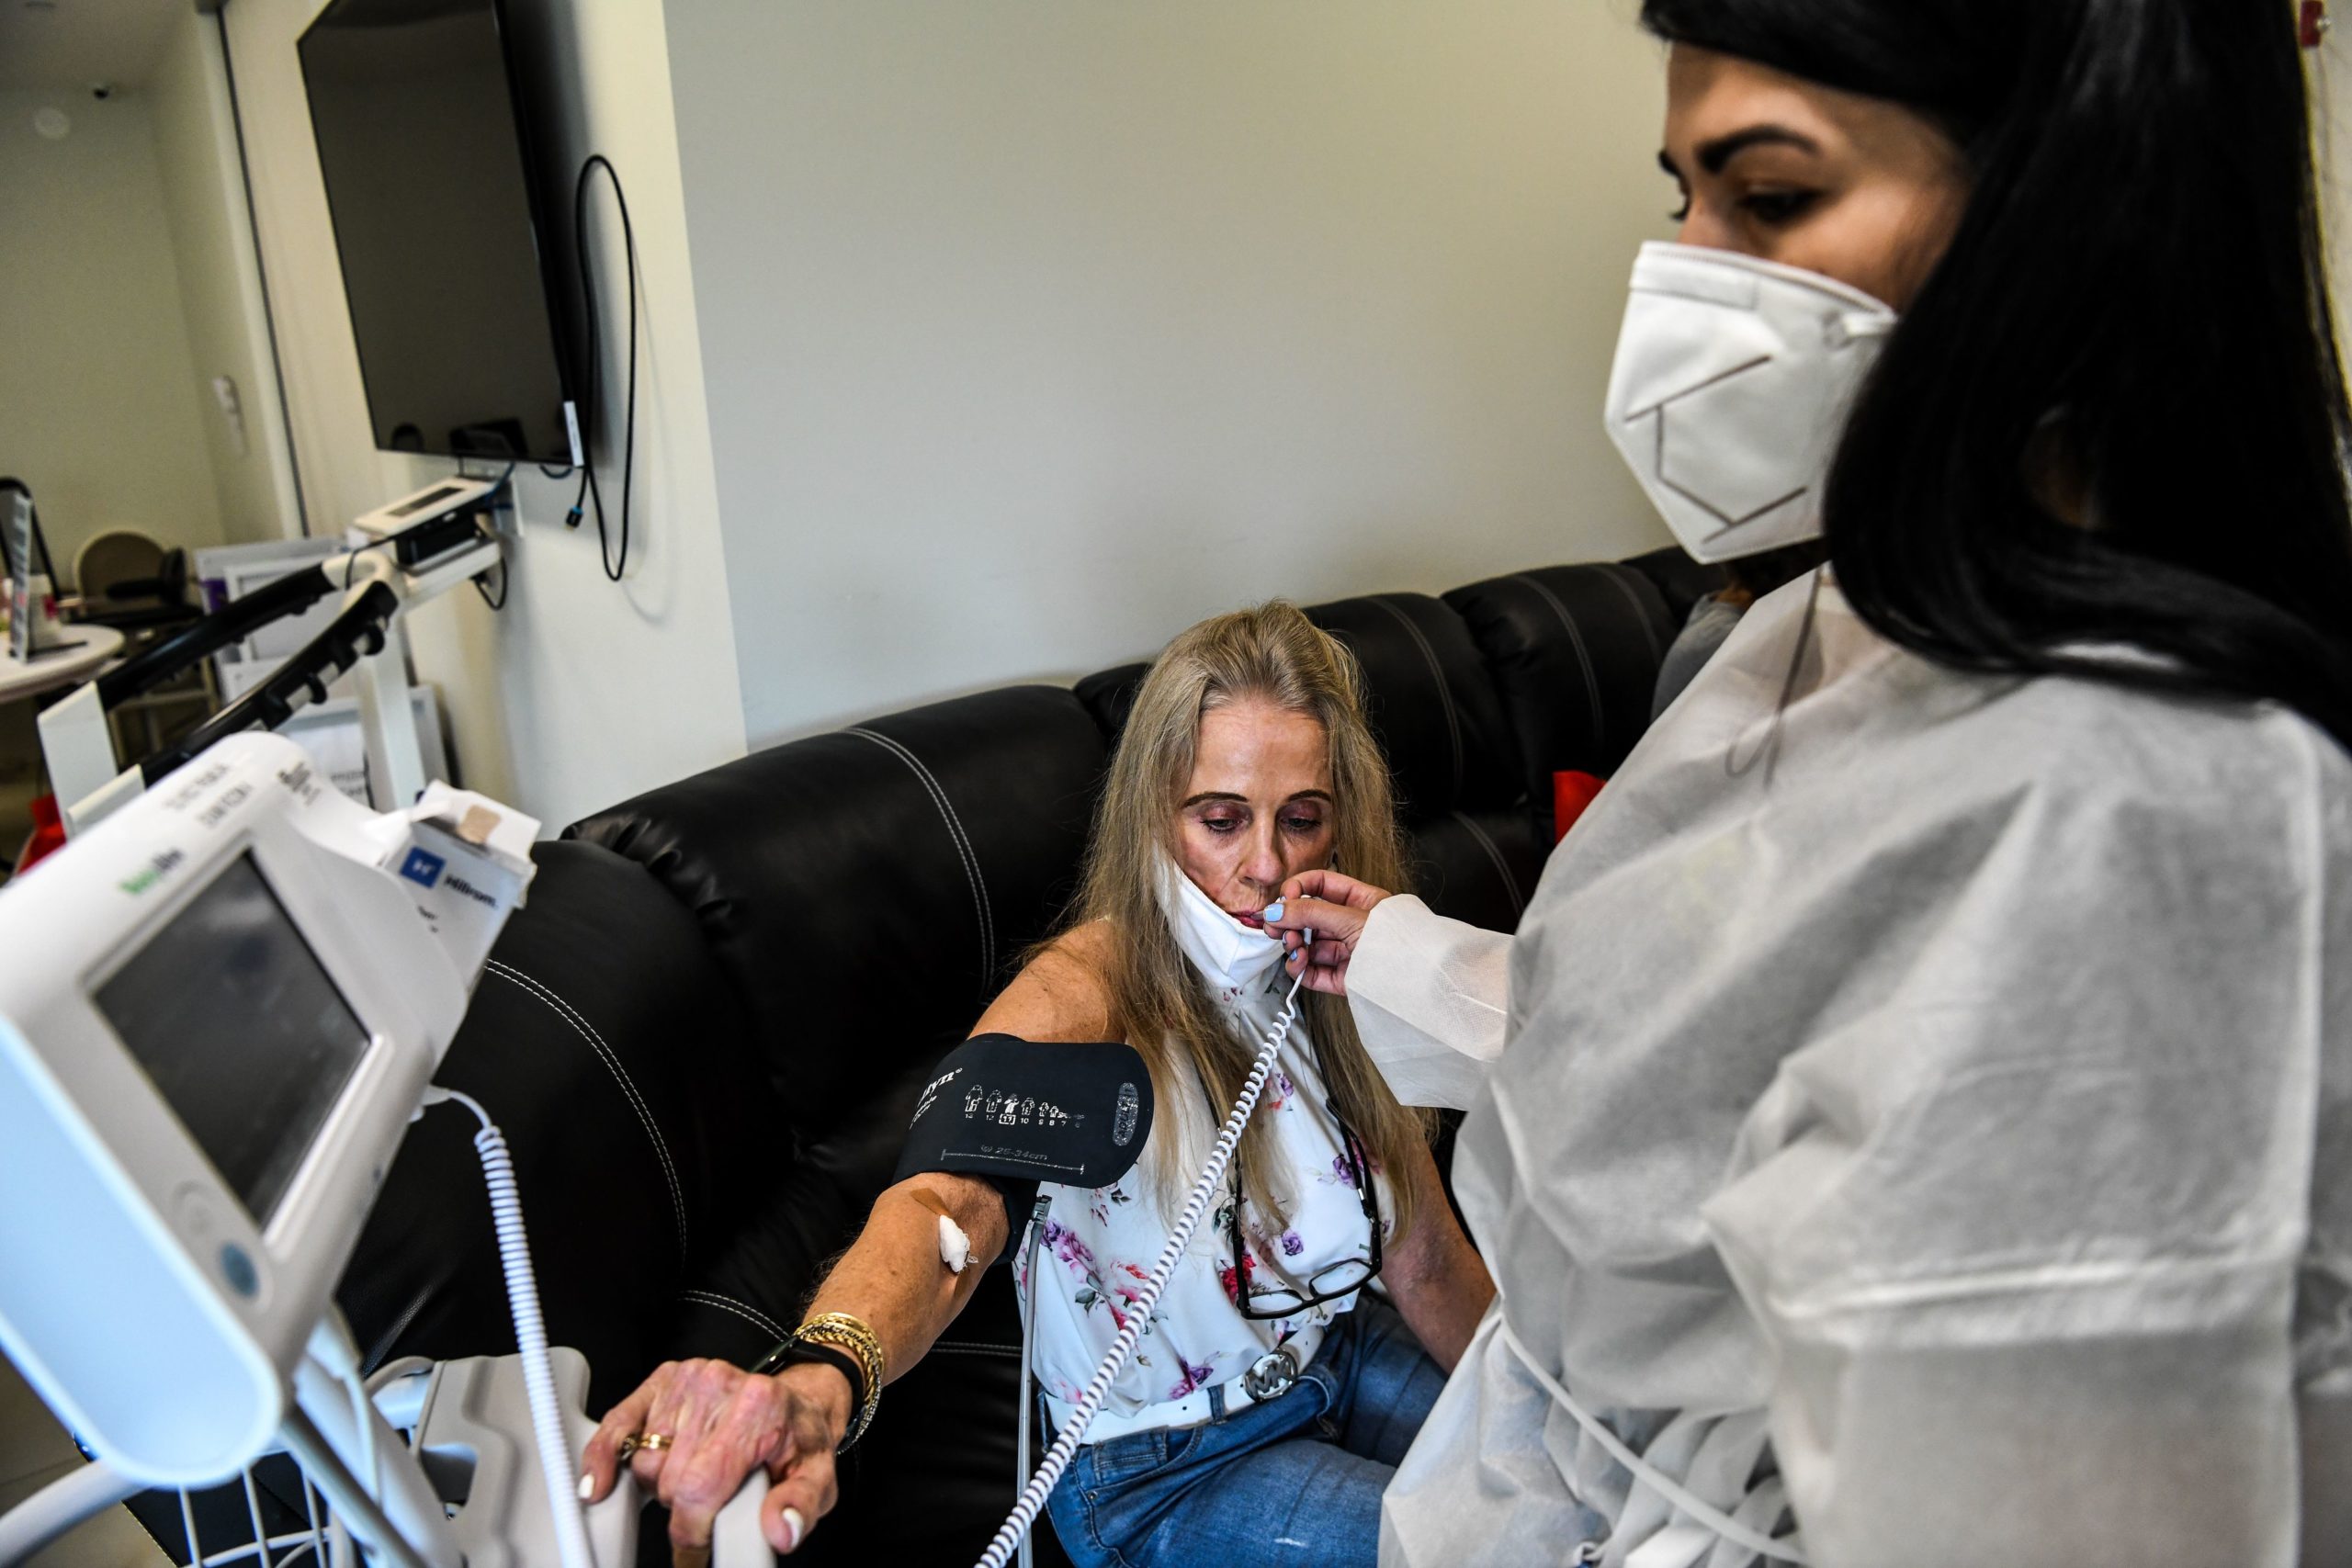 A volunteer is examined by a Nurse Practitioner as she participates in a COVID-19 vaccine study at the Research Centers of America (RCA) in Hollywood, Florida, on August 13, 2020 (CHANDAN KHANNA/AFP via Getty Images)